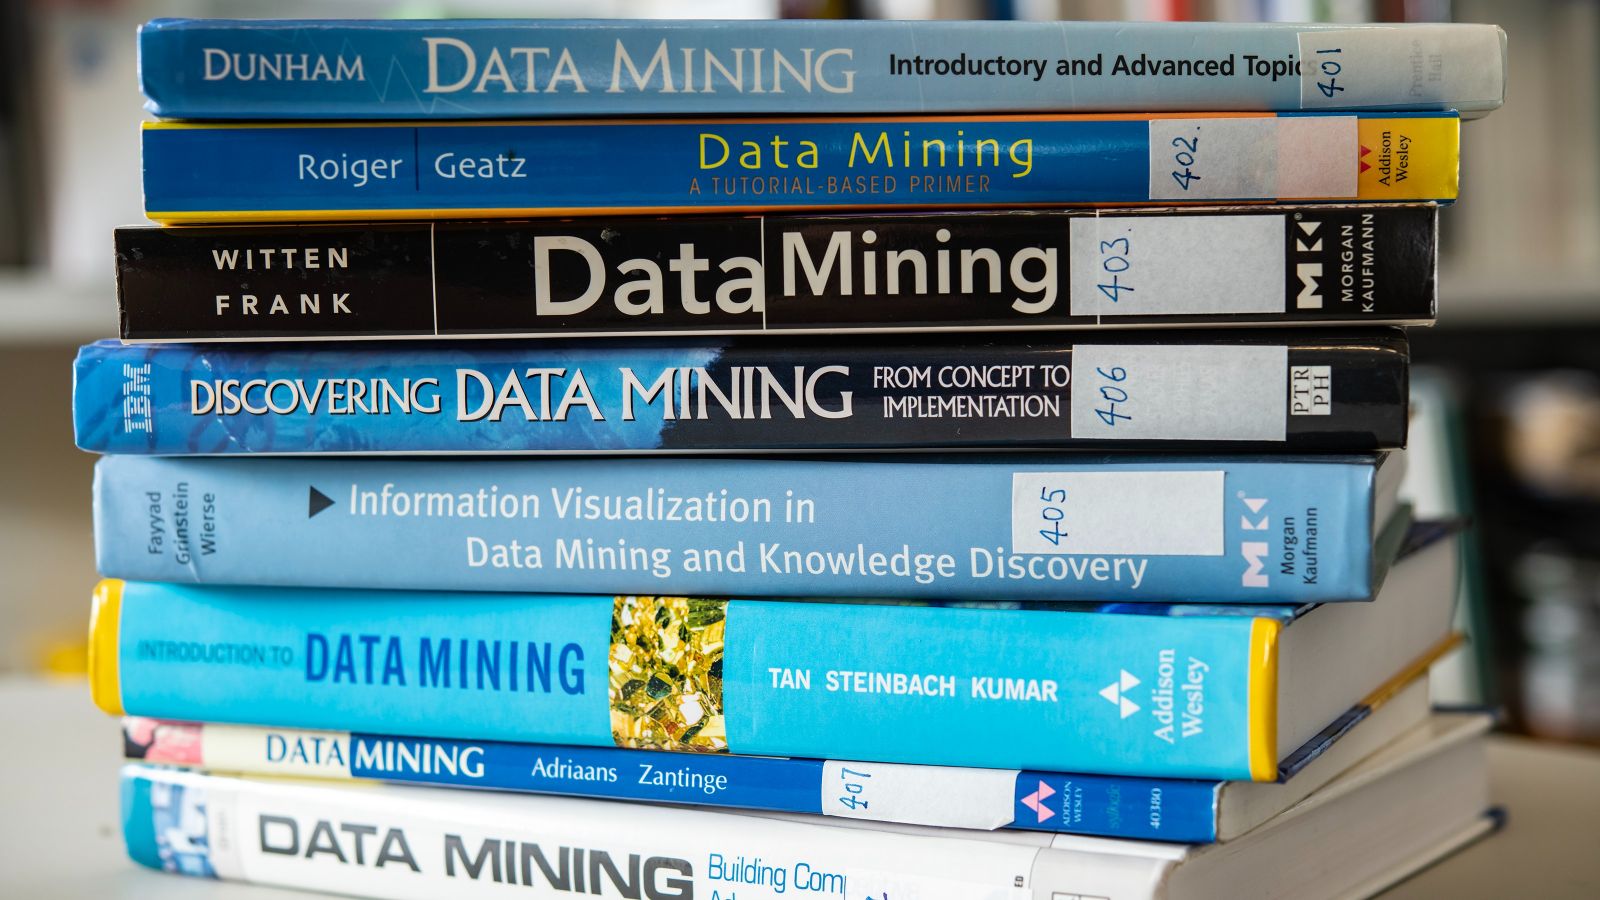 Stack of books whose spines all have titles referring to data mining